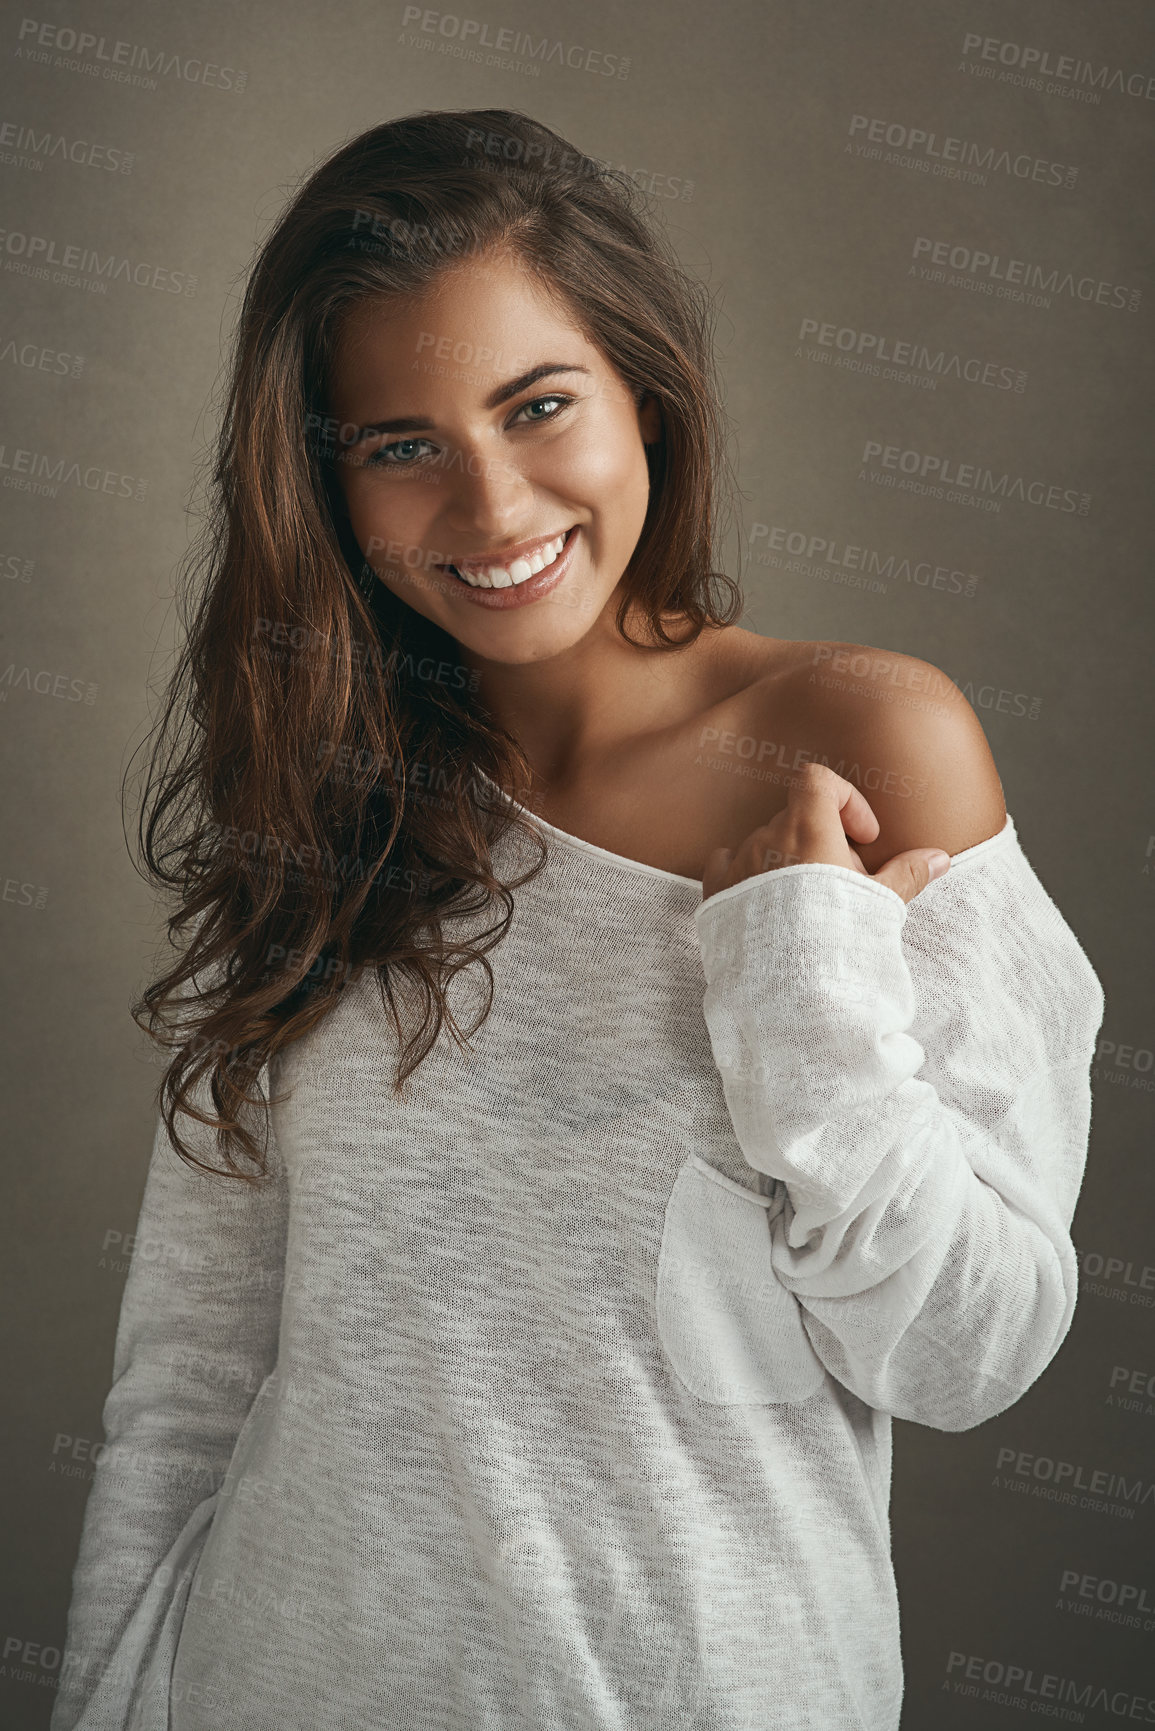 Buy stock photo Portrait of a beautiful young woman smiling against a brown background in studio